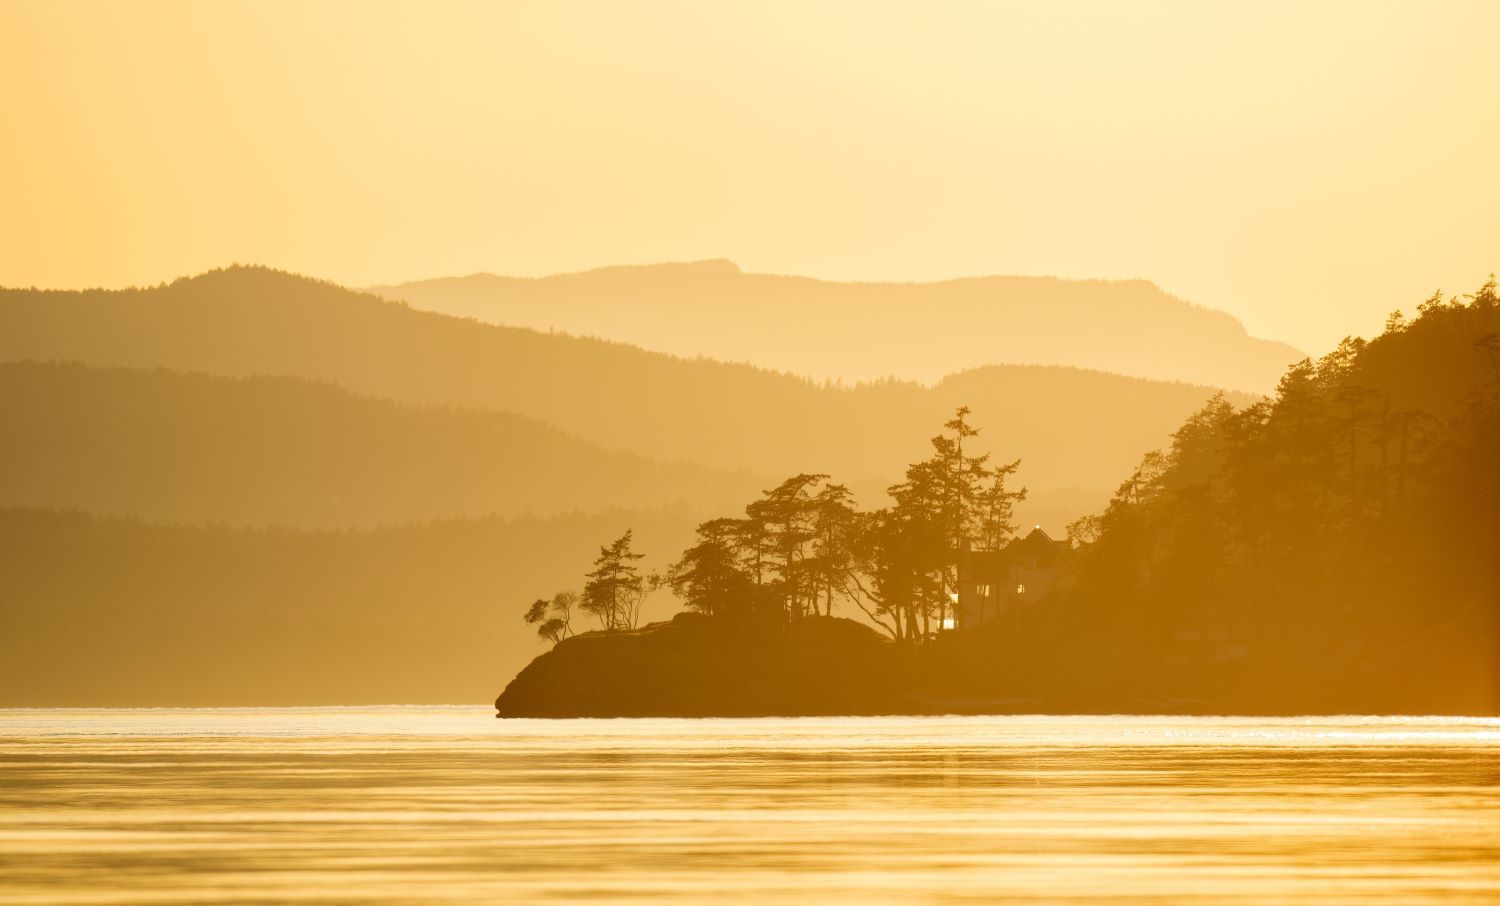 An island and water in shades of gold at sunset.